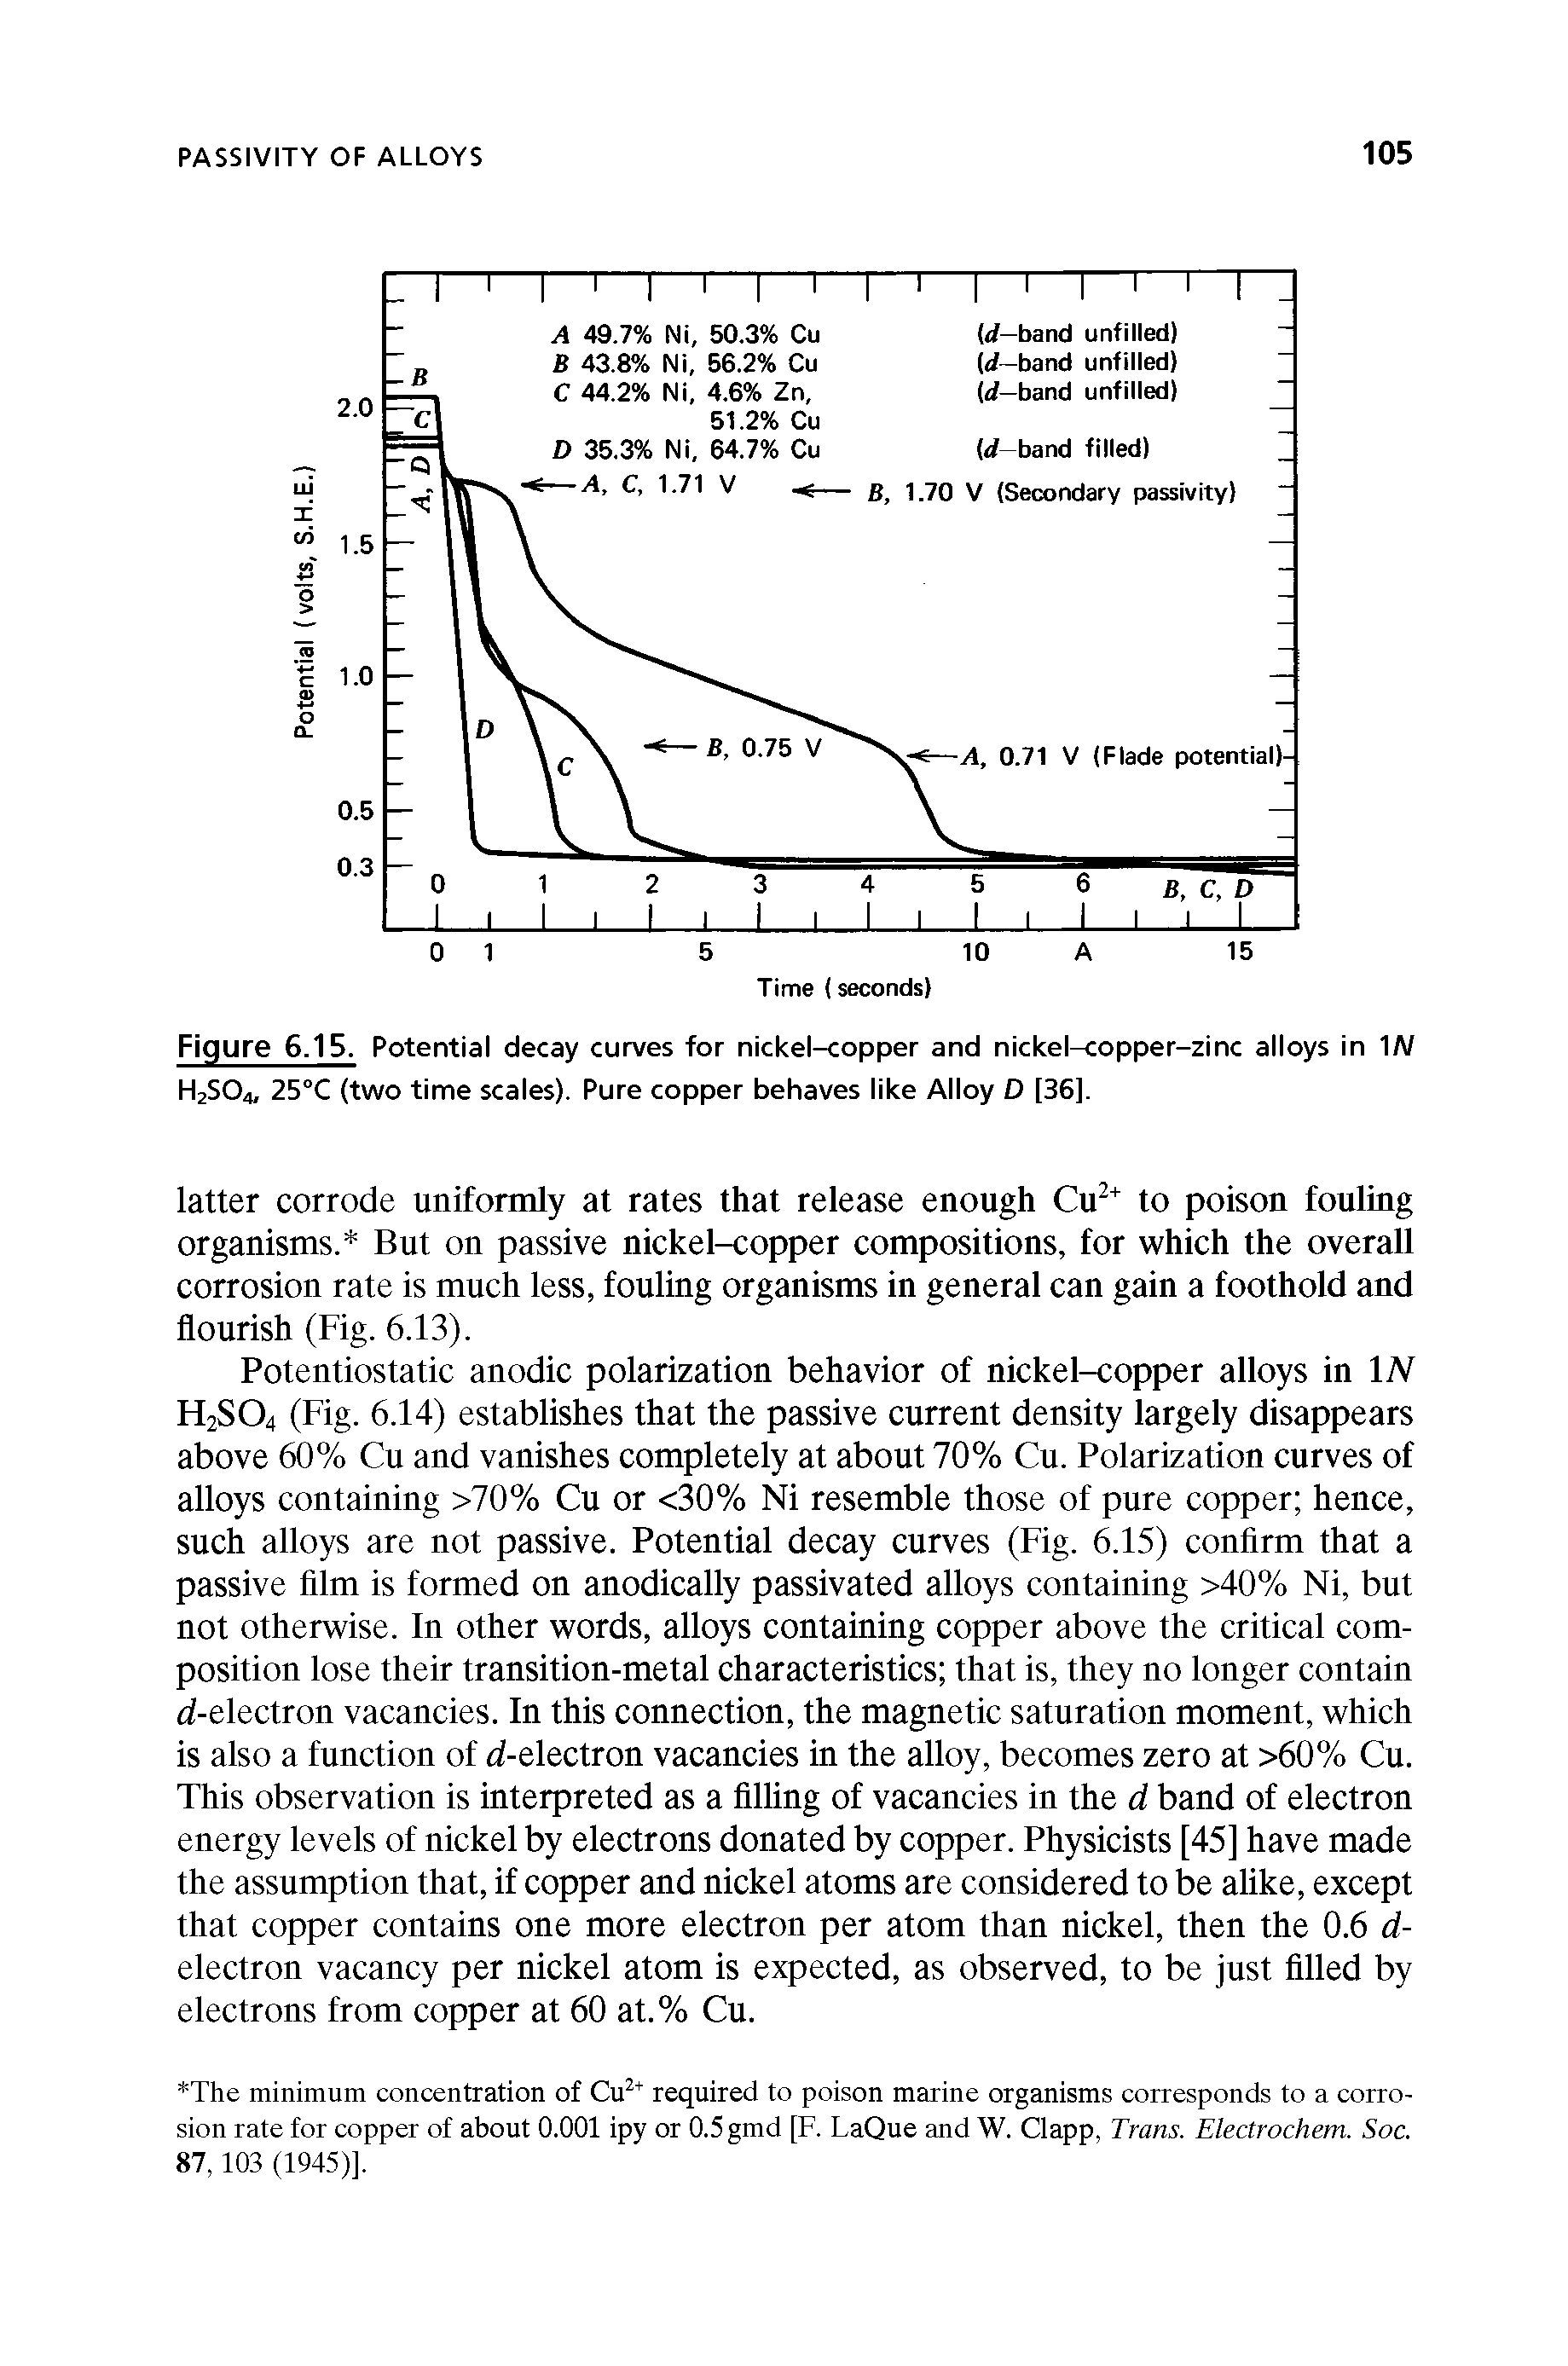 Figure 6.15. Potential decay curves for nickel-copper and nickel-copper-zinc alloys in 1A/ H2SO4, 25°C (two time scales). Pure copper behaves like Alloy D [36].